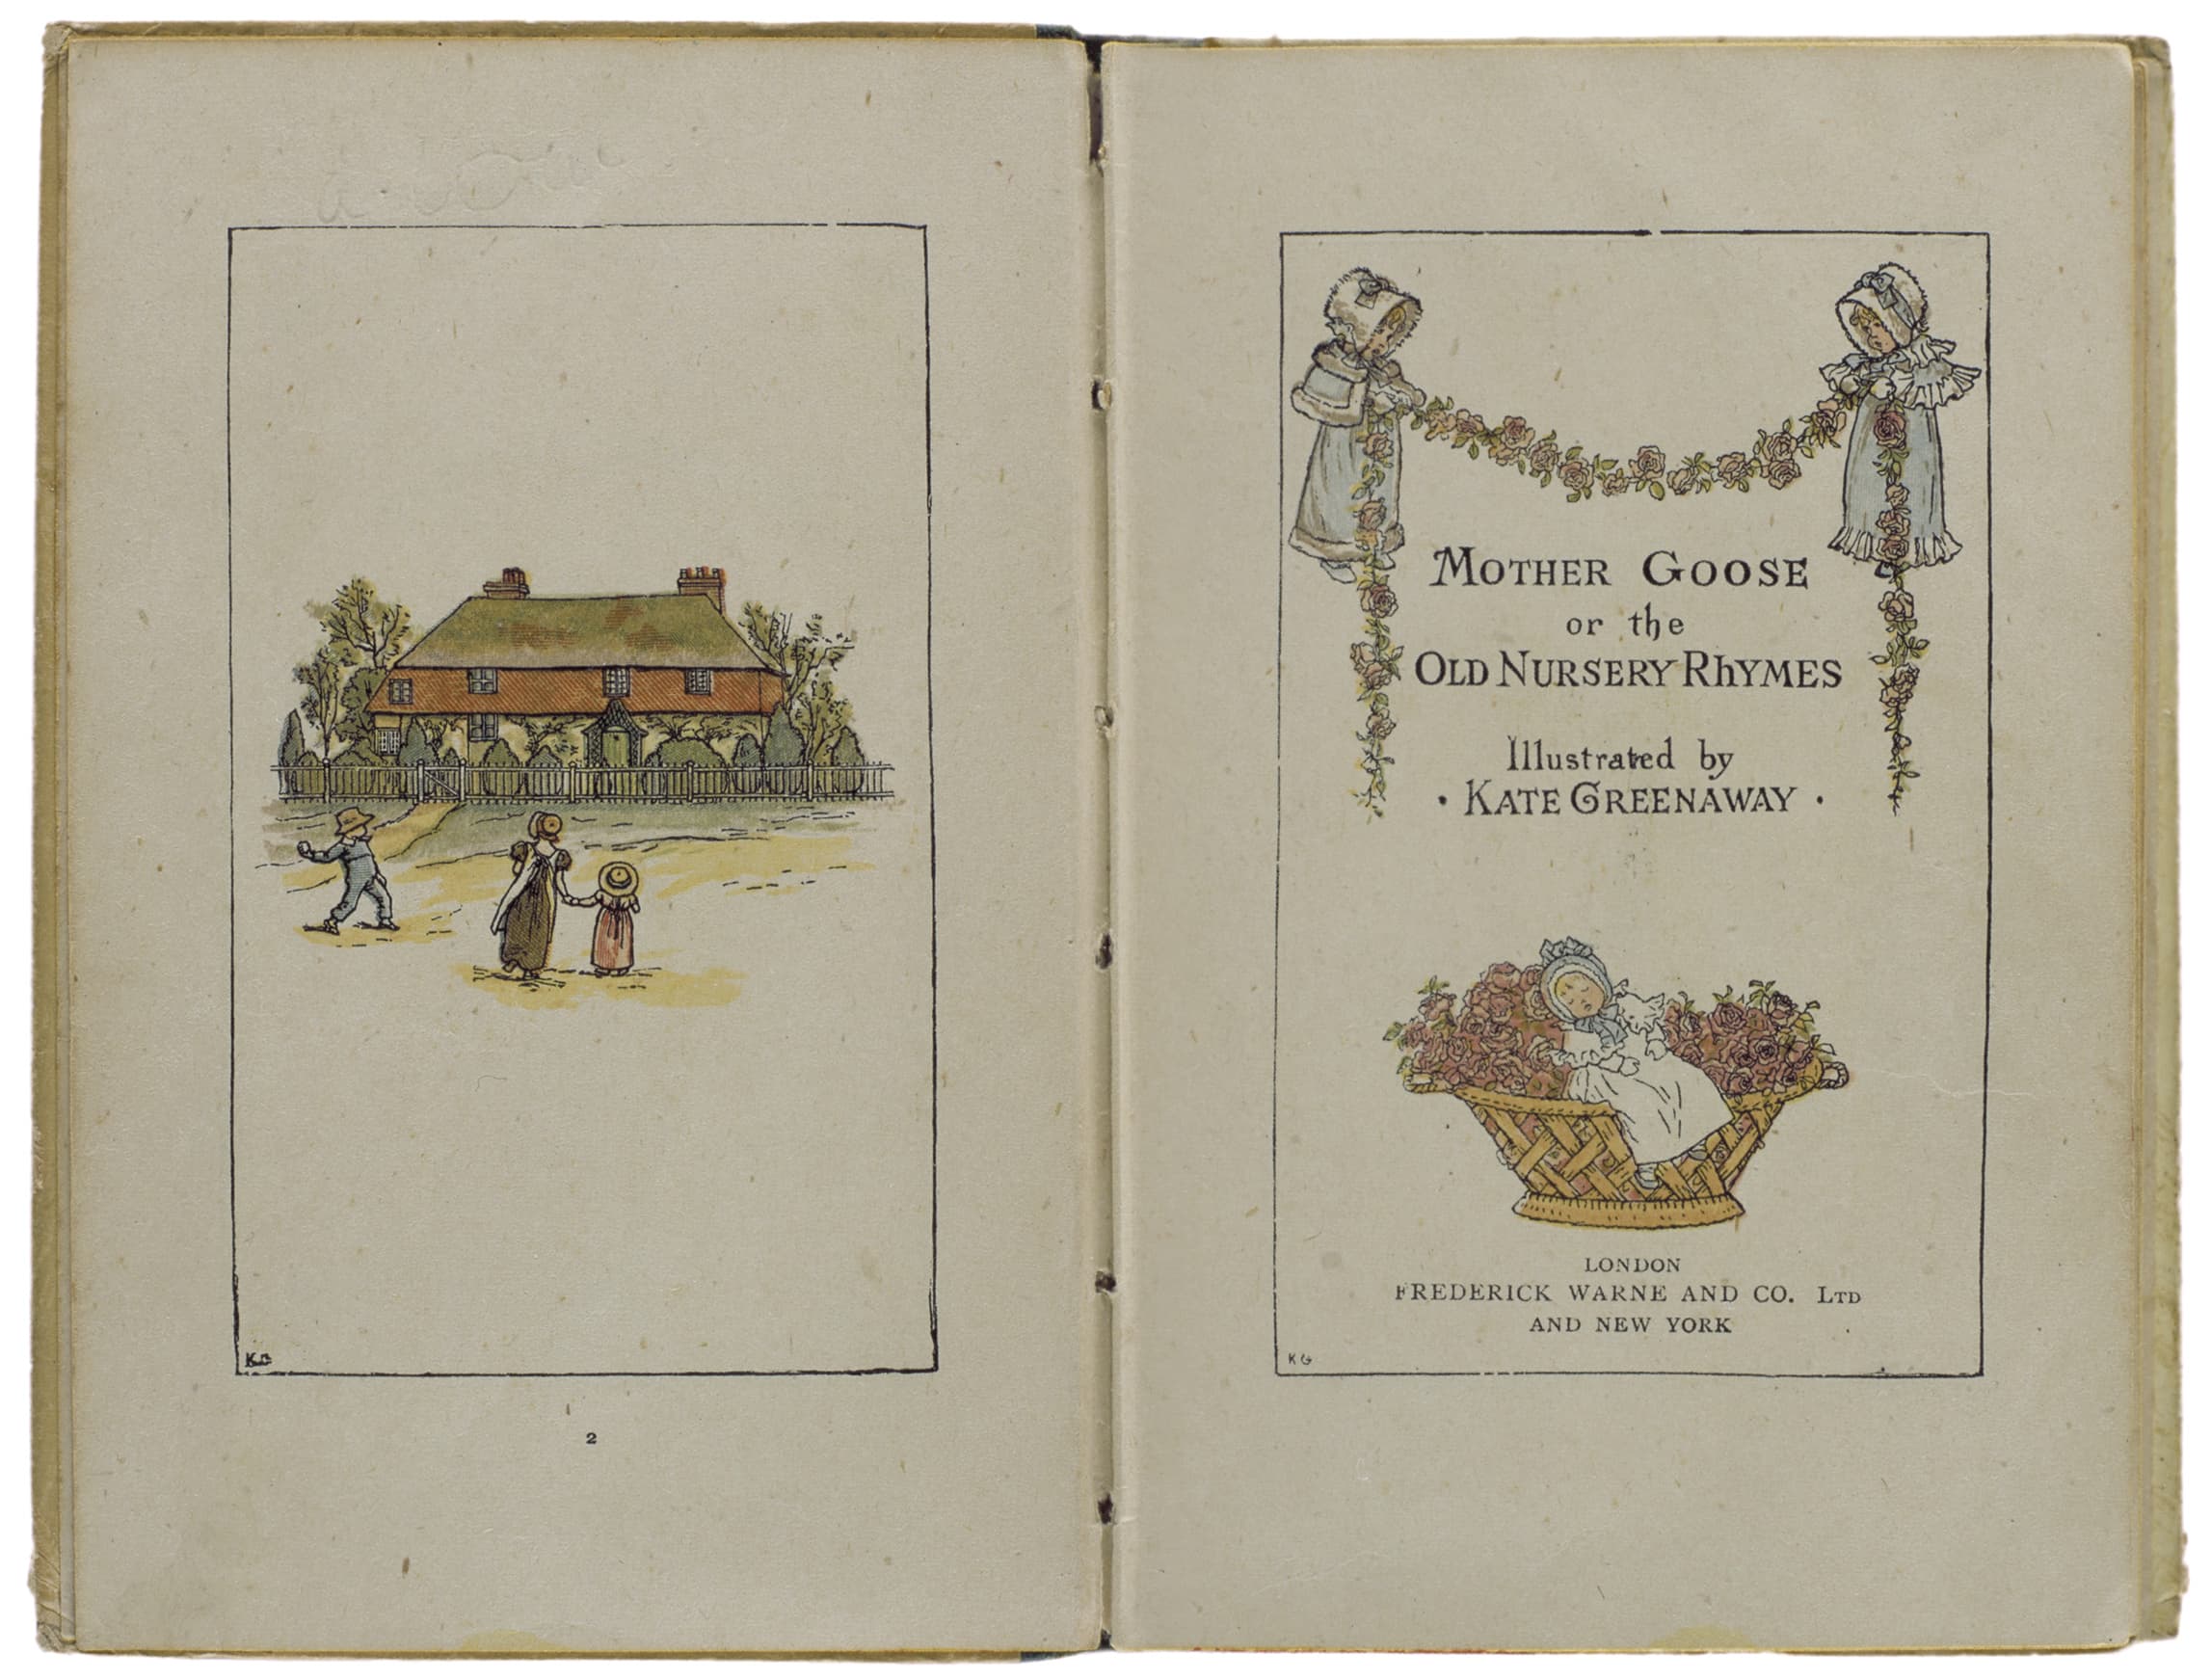 page 2-3 of Mother Goose, title page